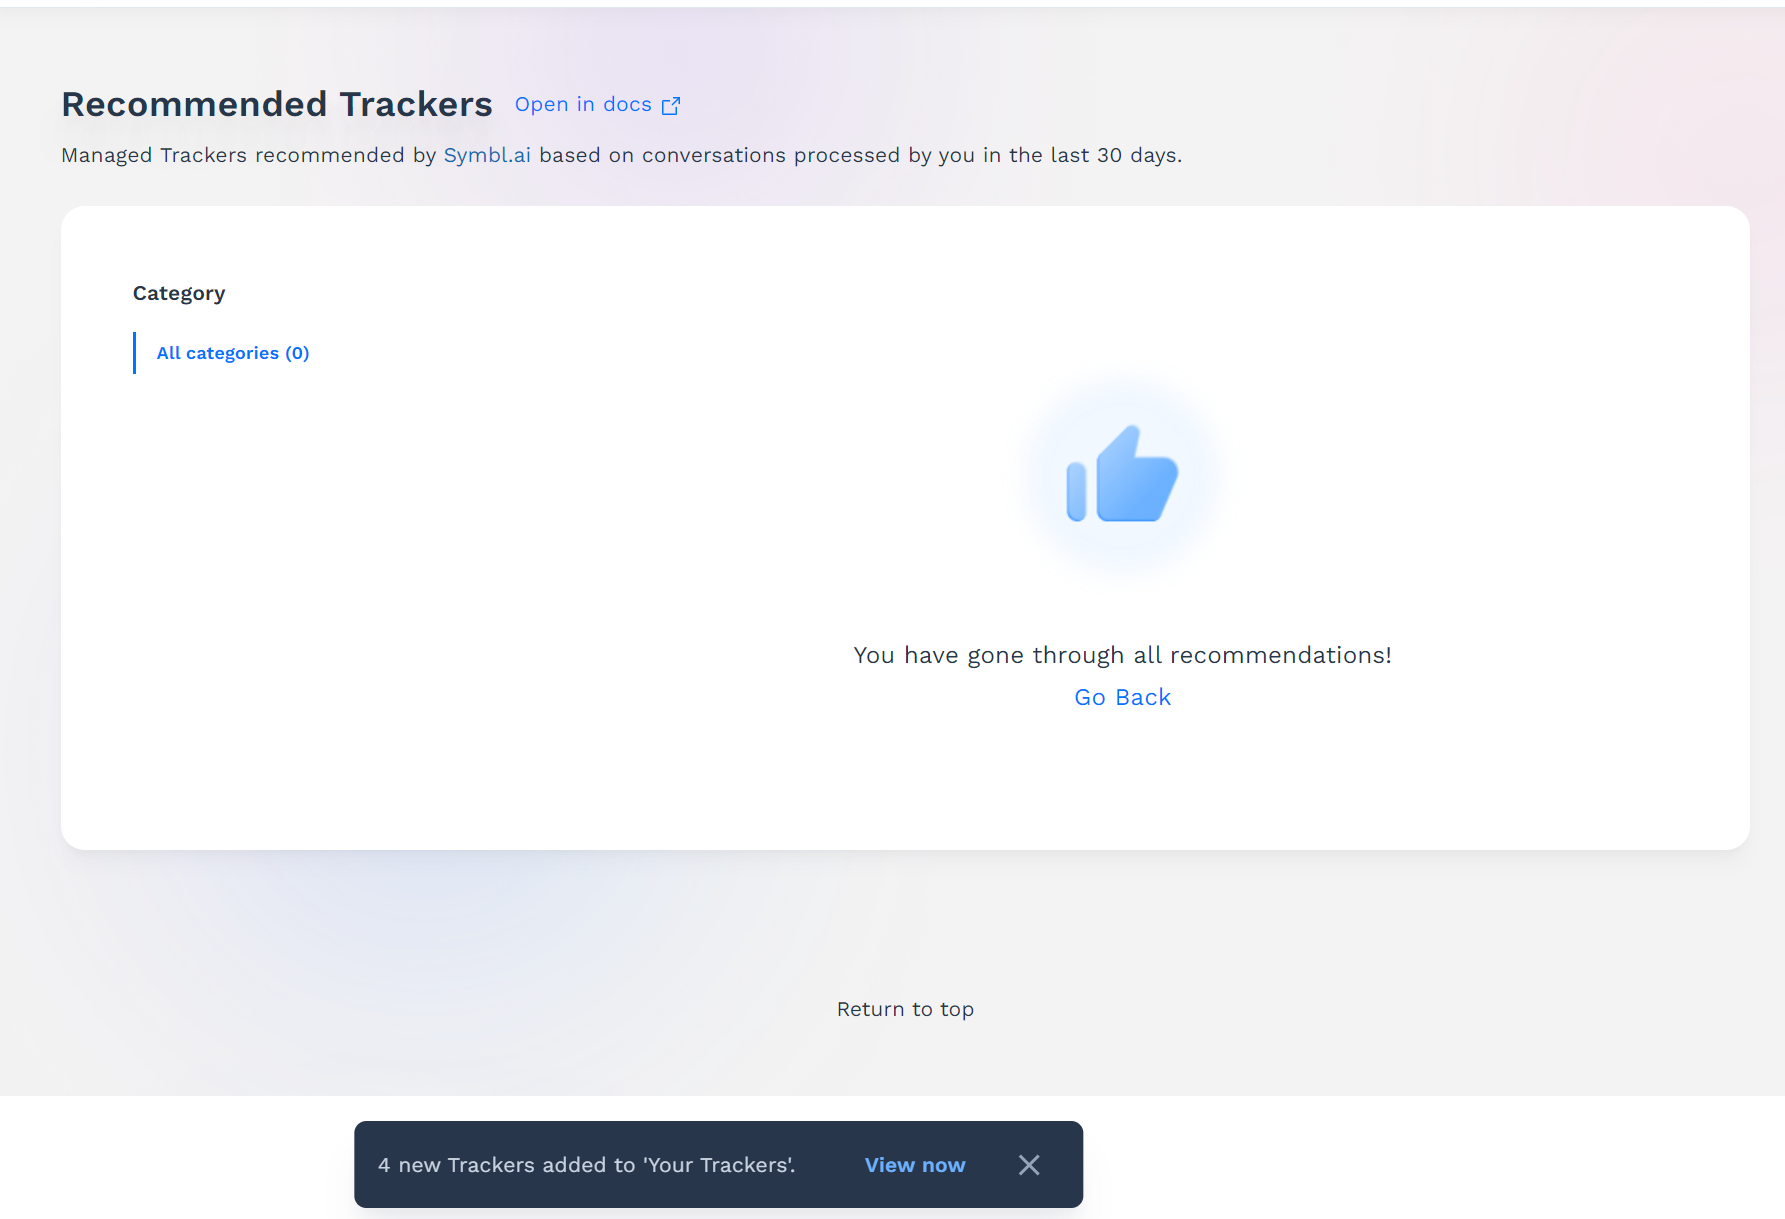 New Trackers Added